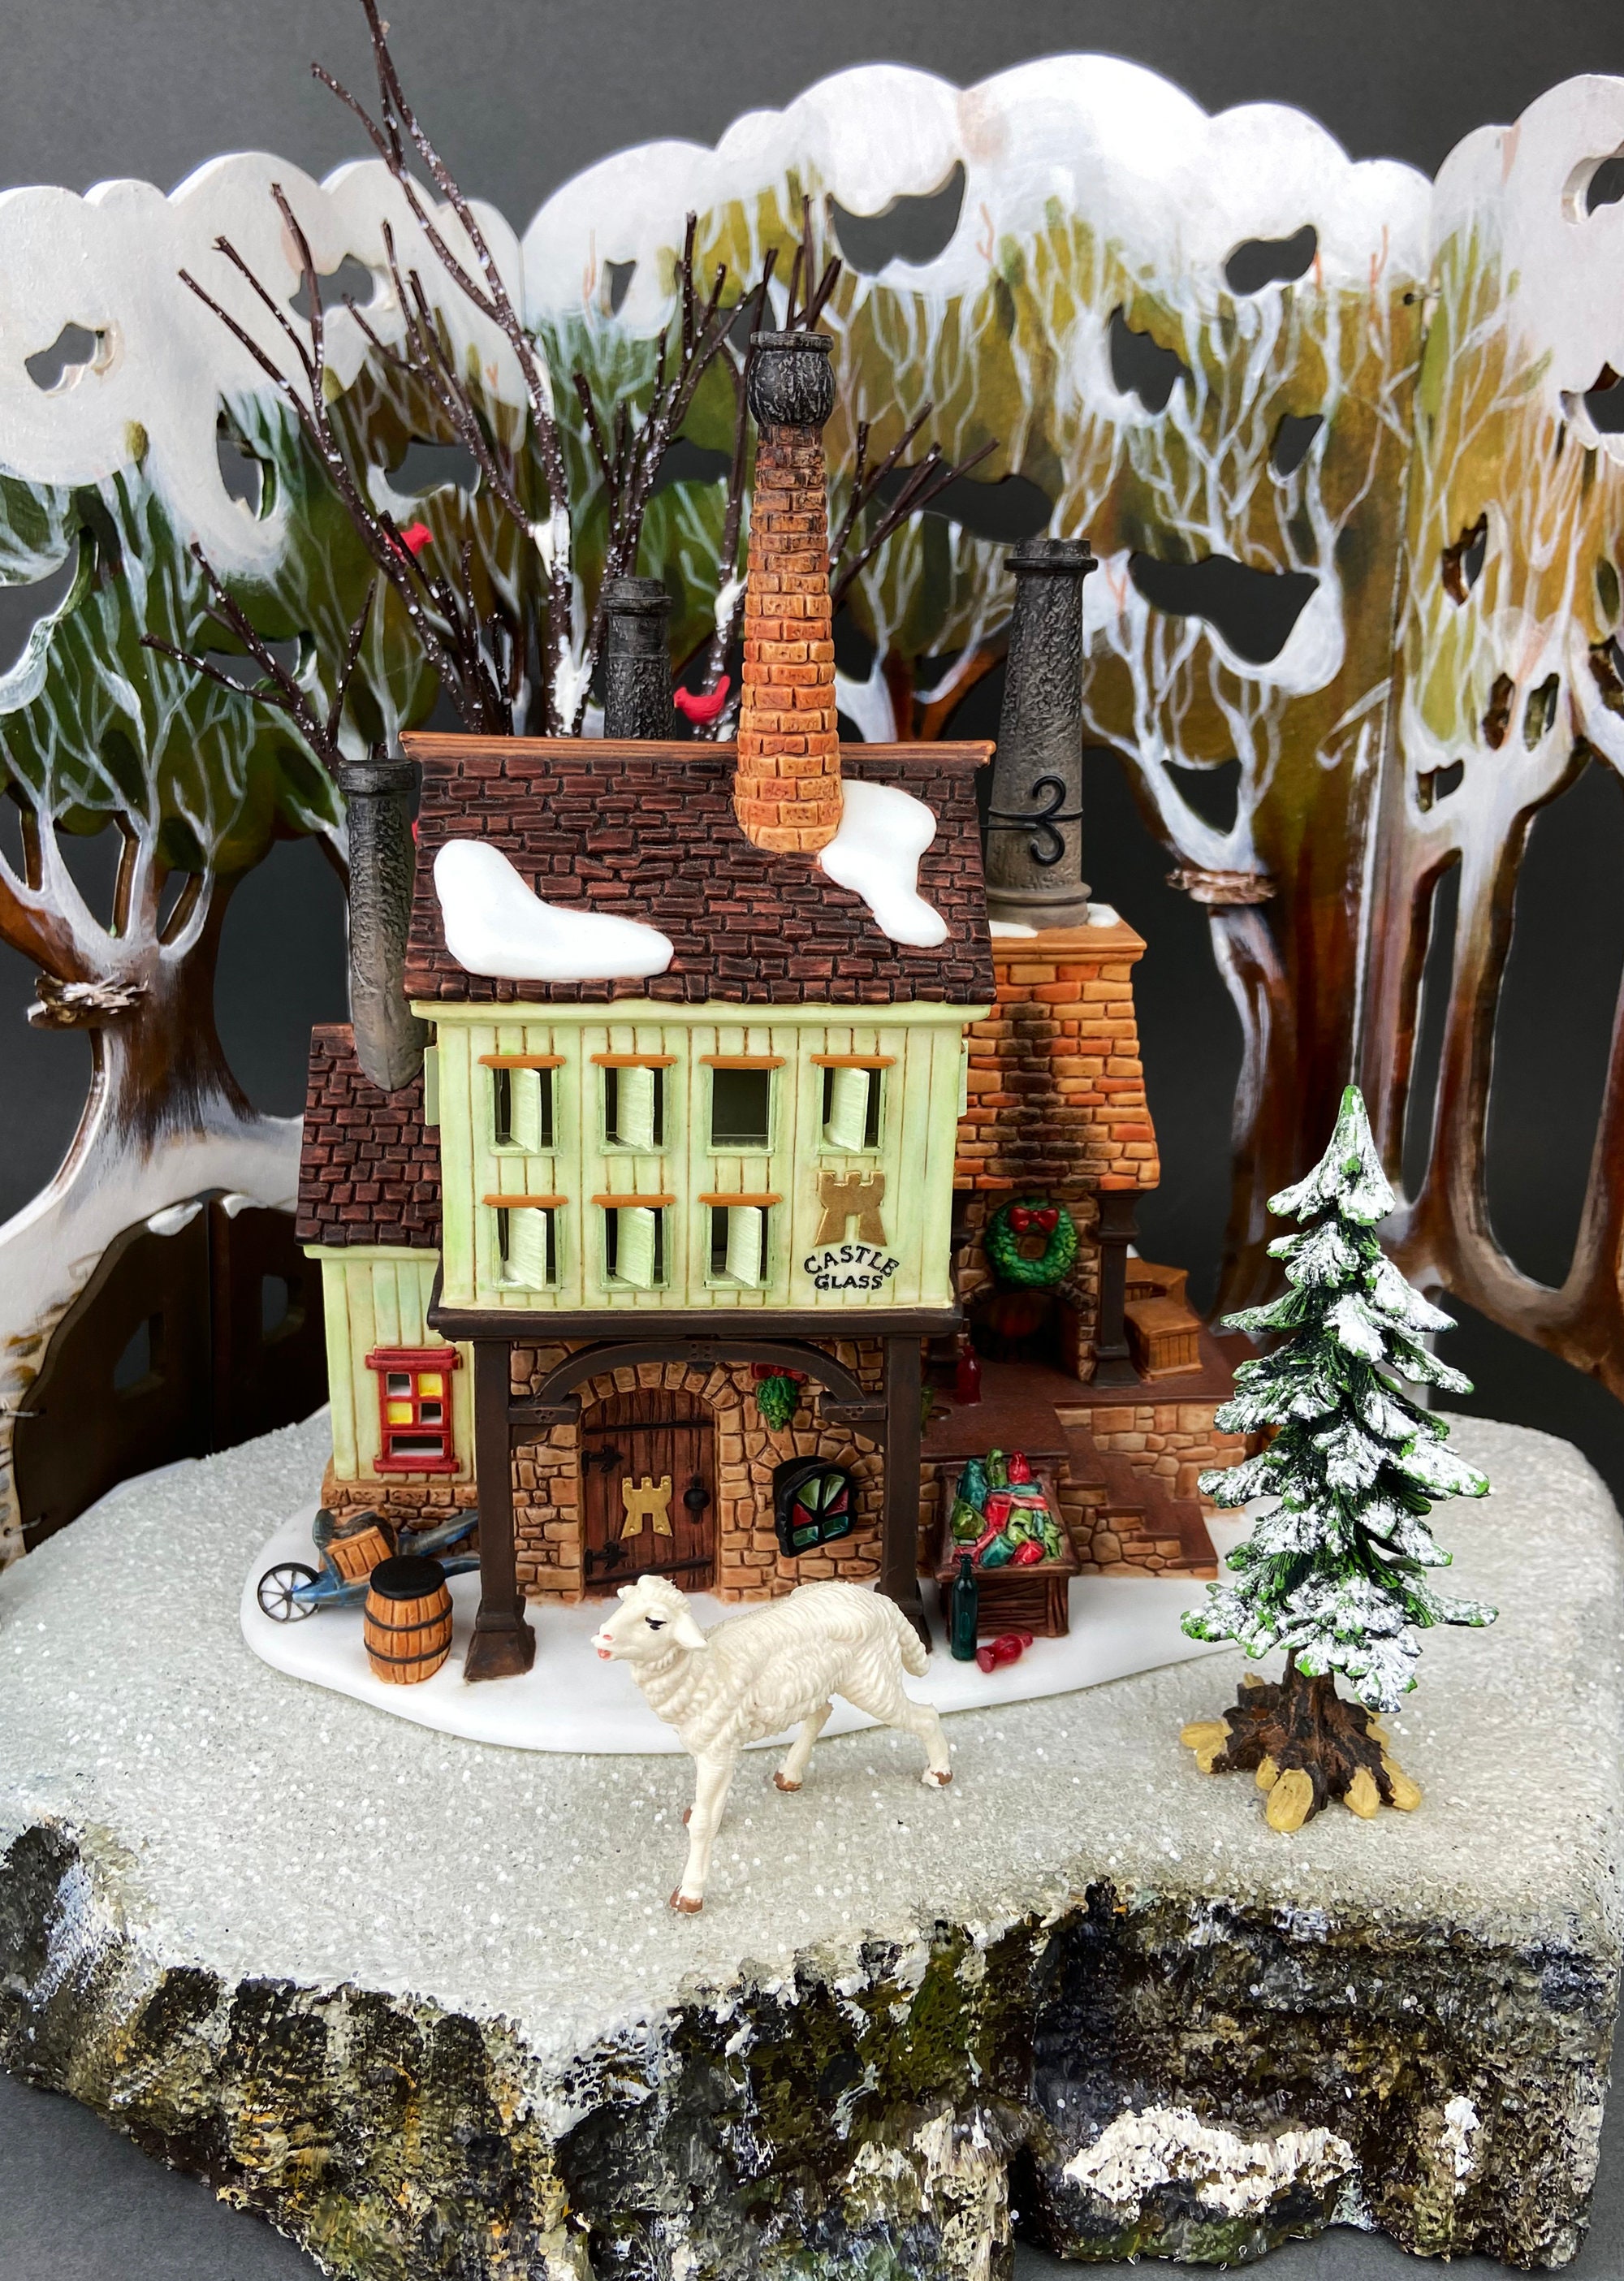 Illuminated Porcelain Christmas Village House by Dept. 56. Northern Li –  Anything Discovered